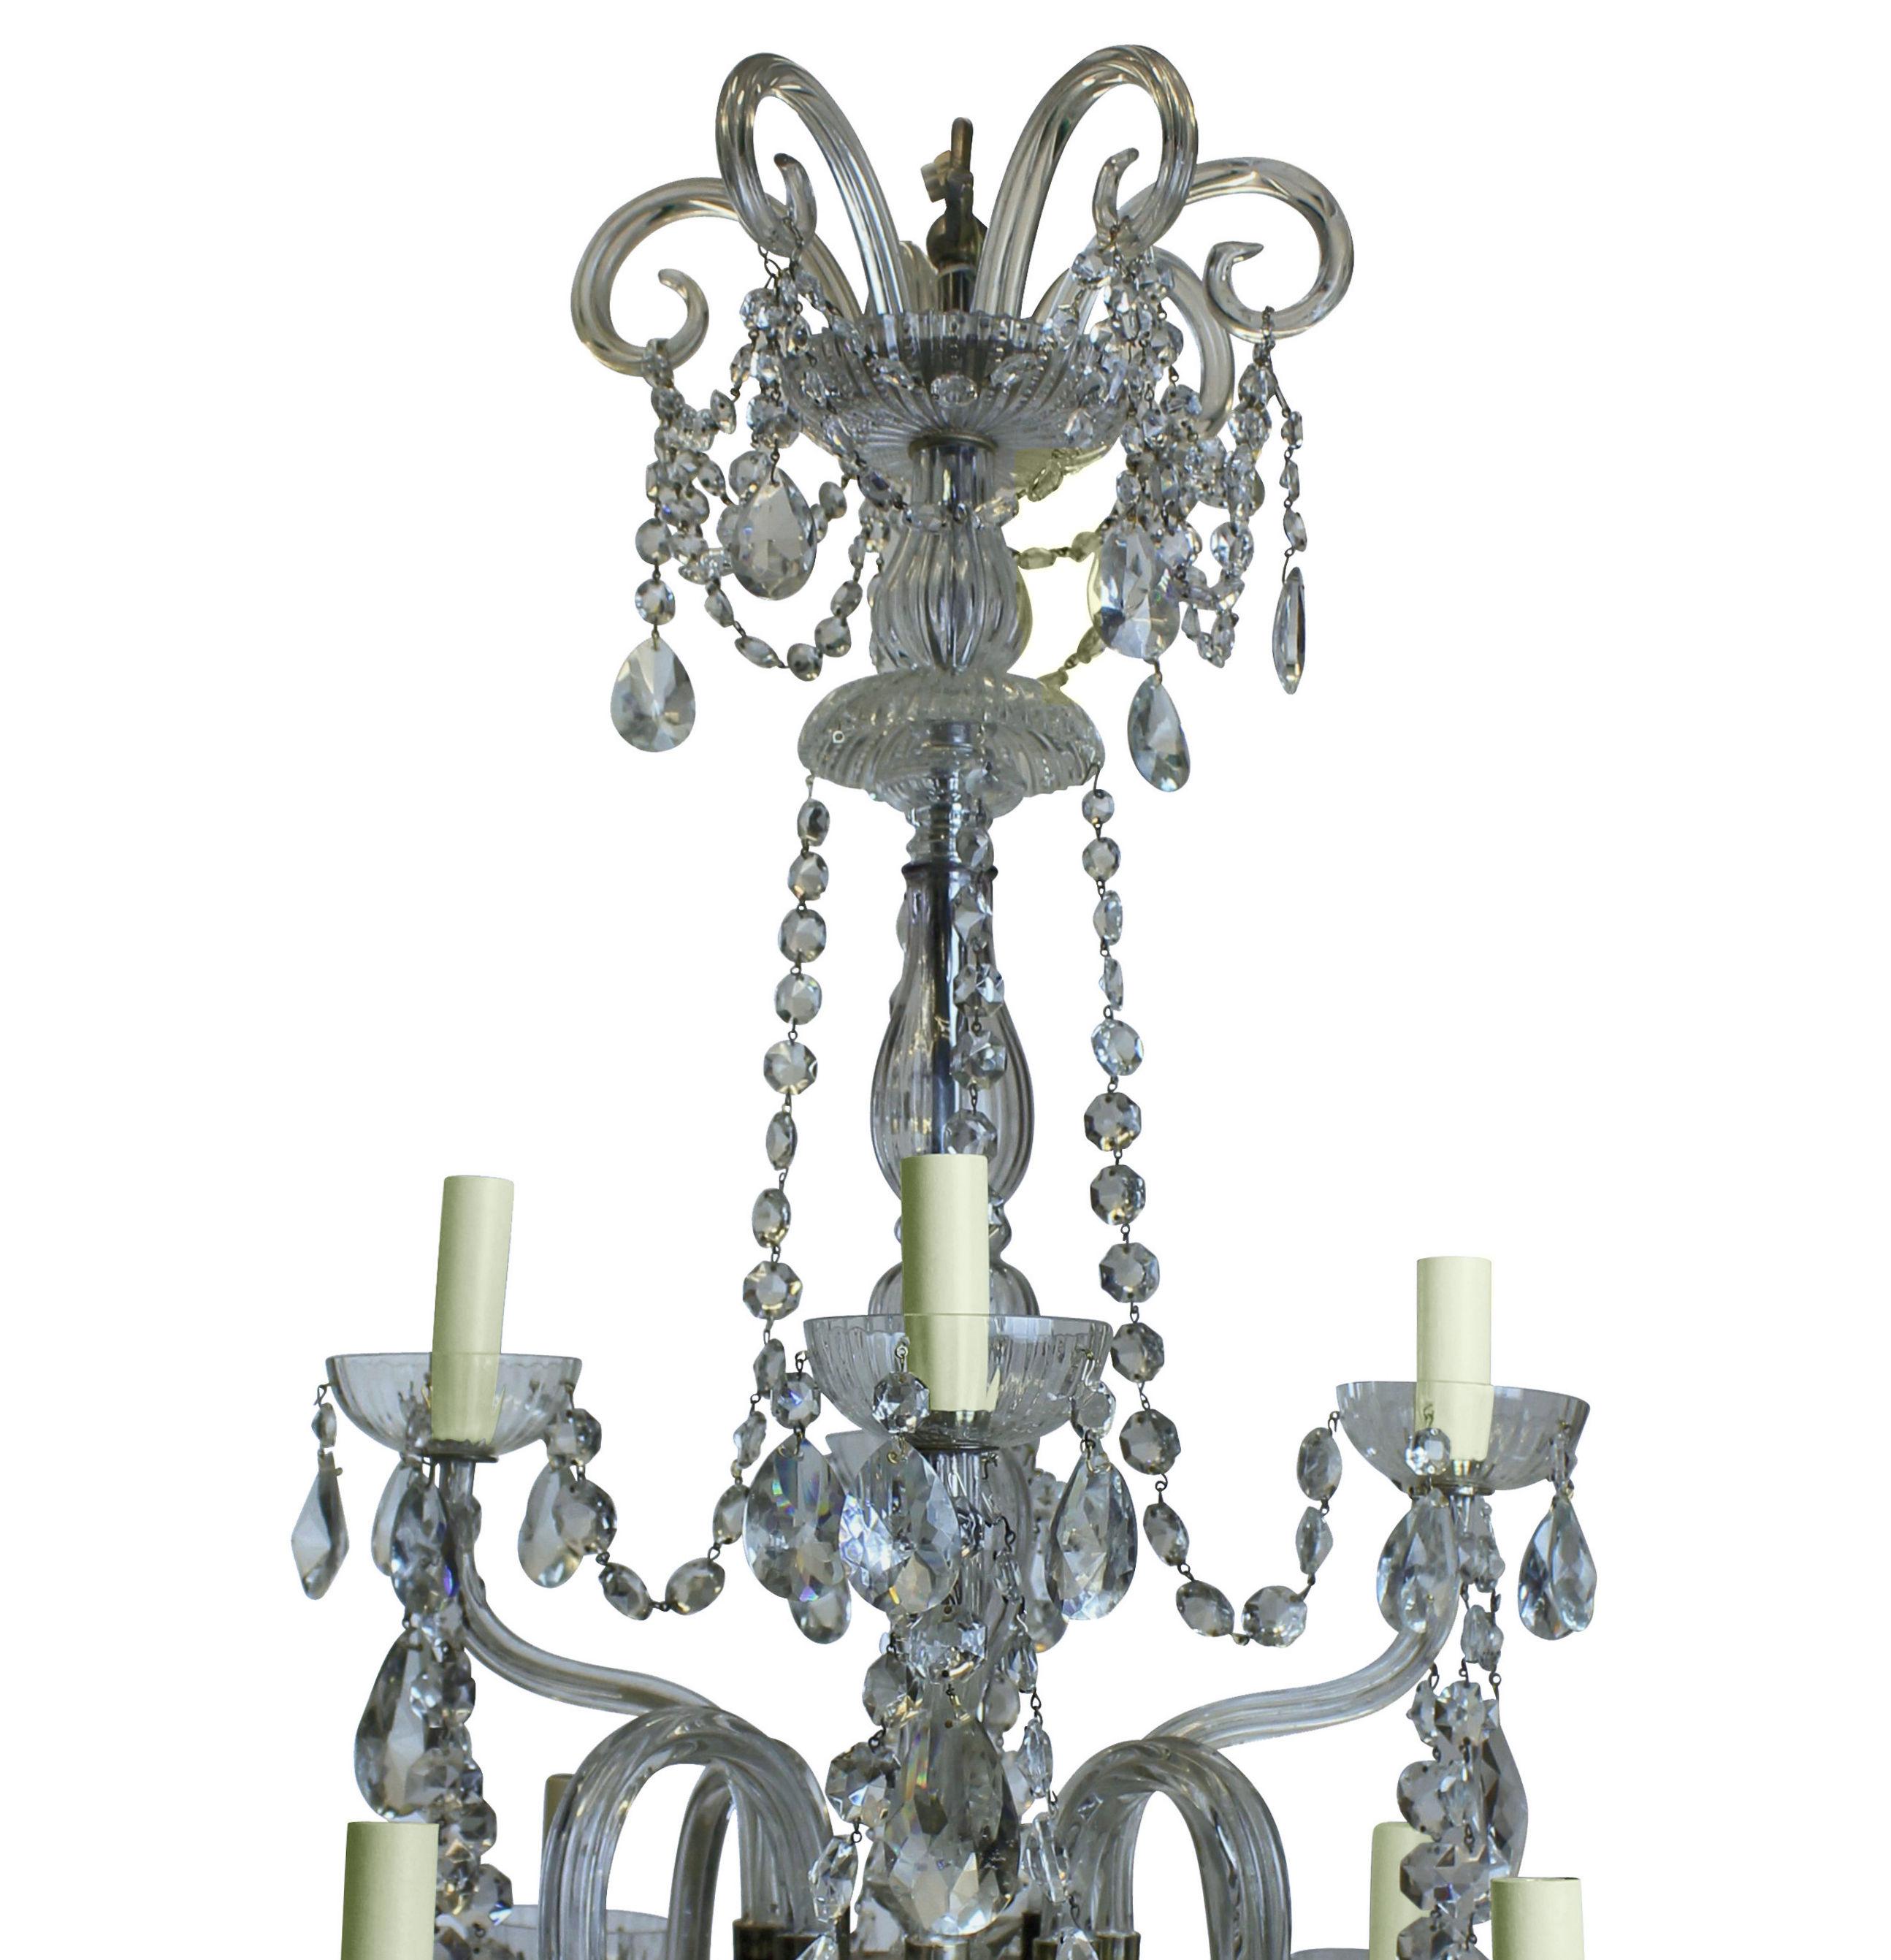 An Edwardian cut glass chandelier, with a tier of four up-swept arms and four down-swept. Hung throughout with cut glass pendants and chains, with a scrolled corona at the top.